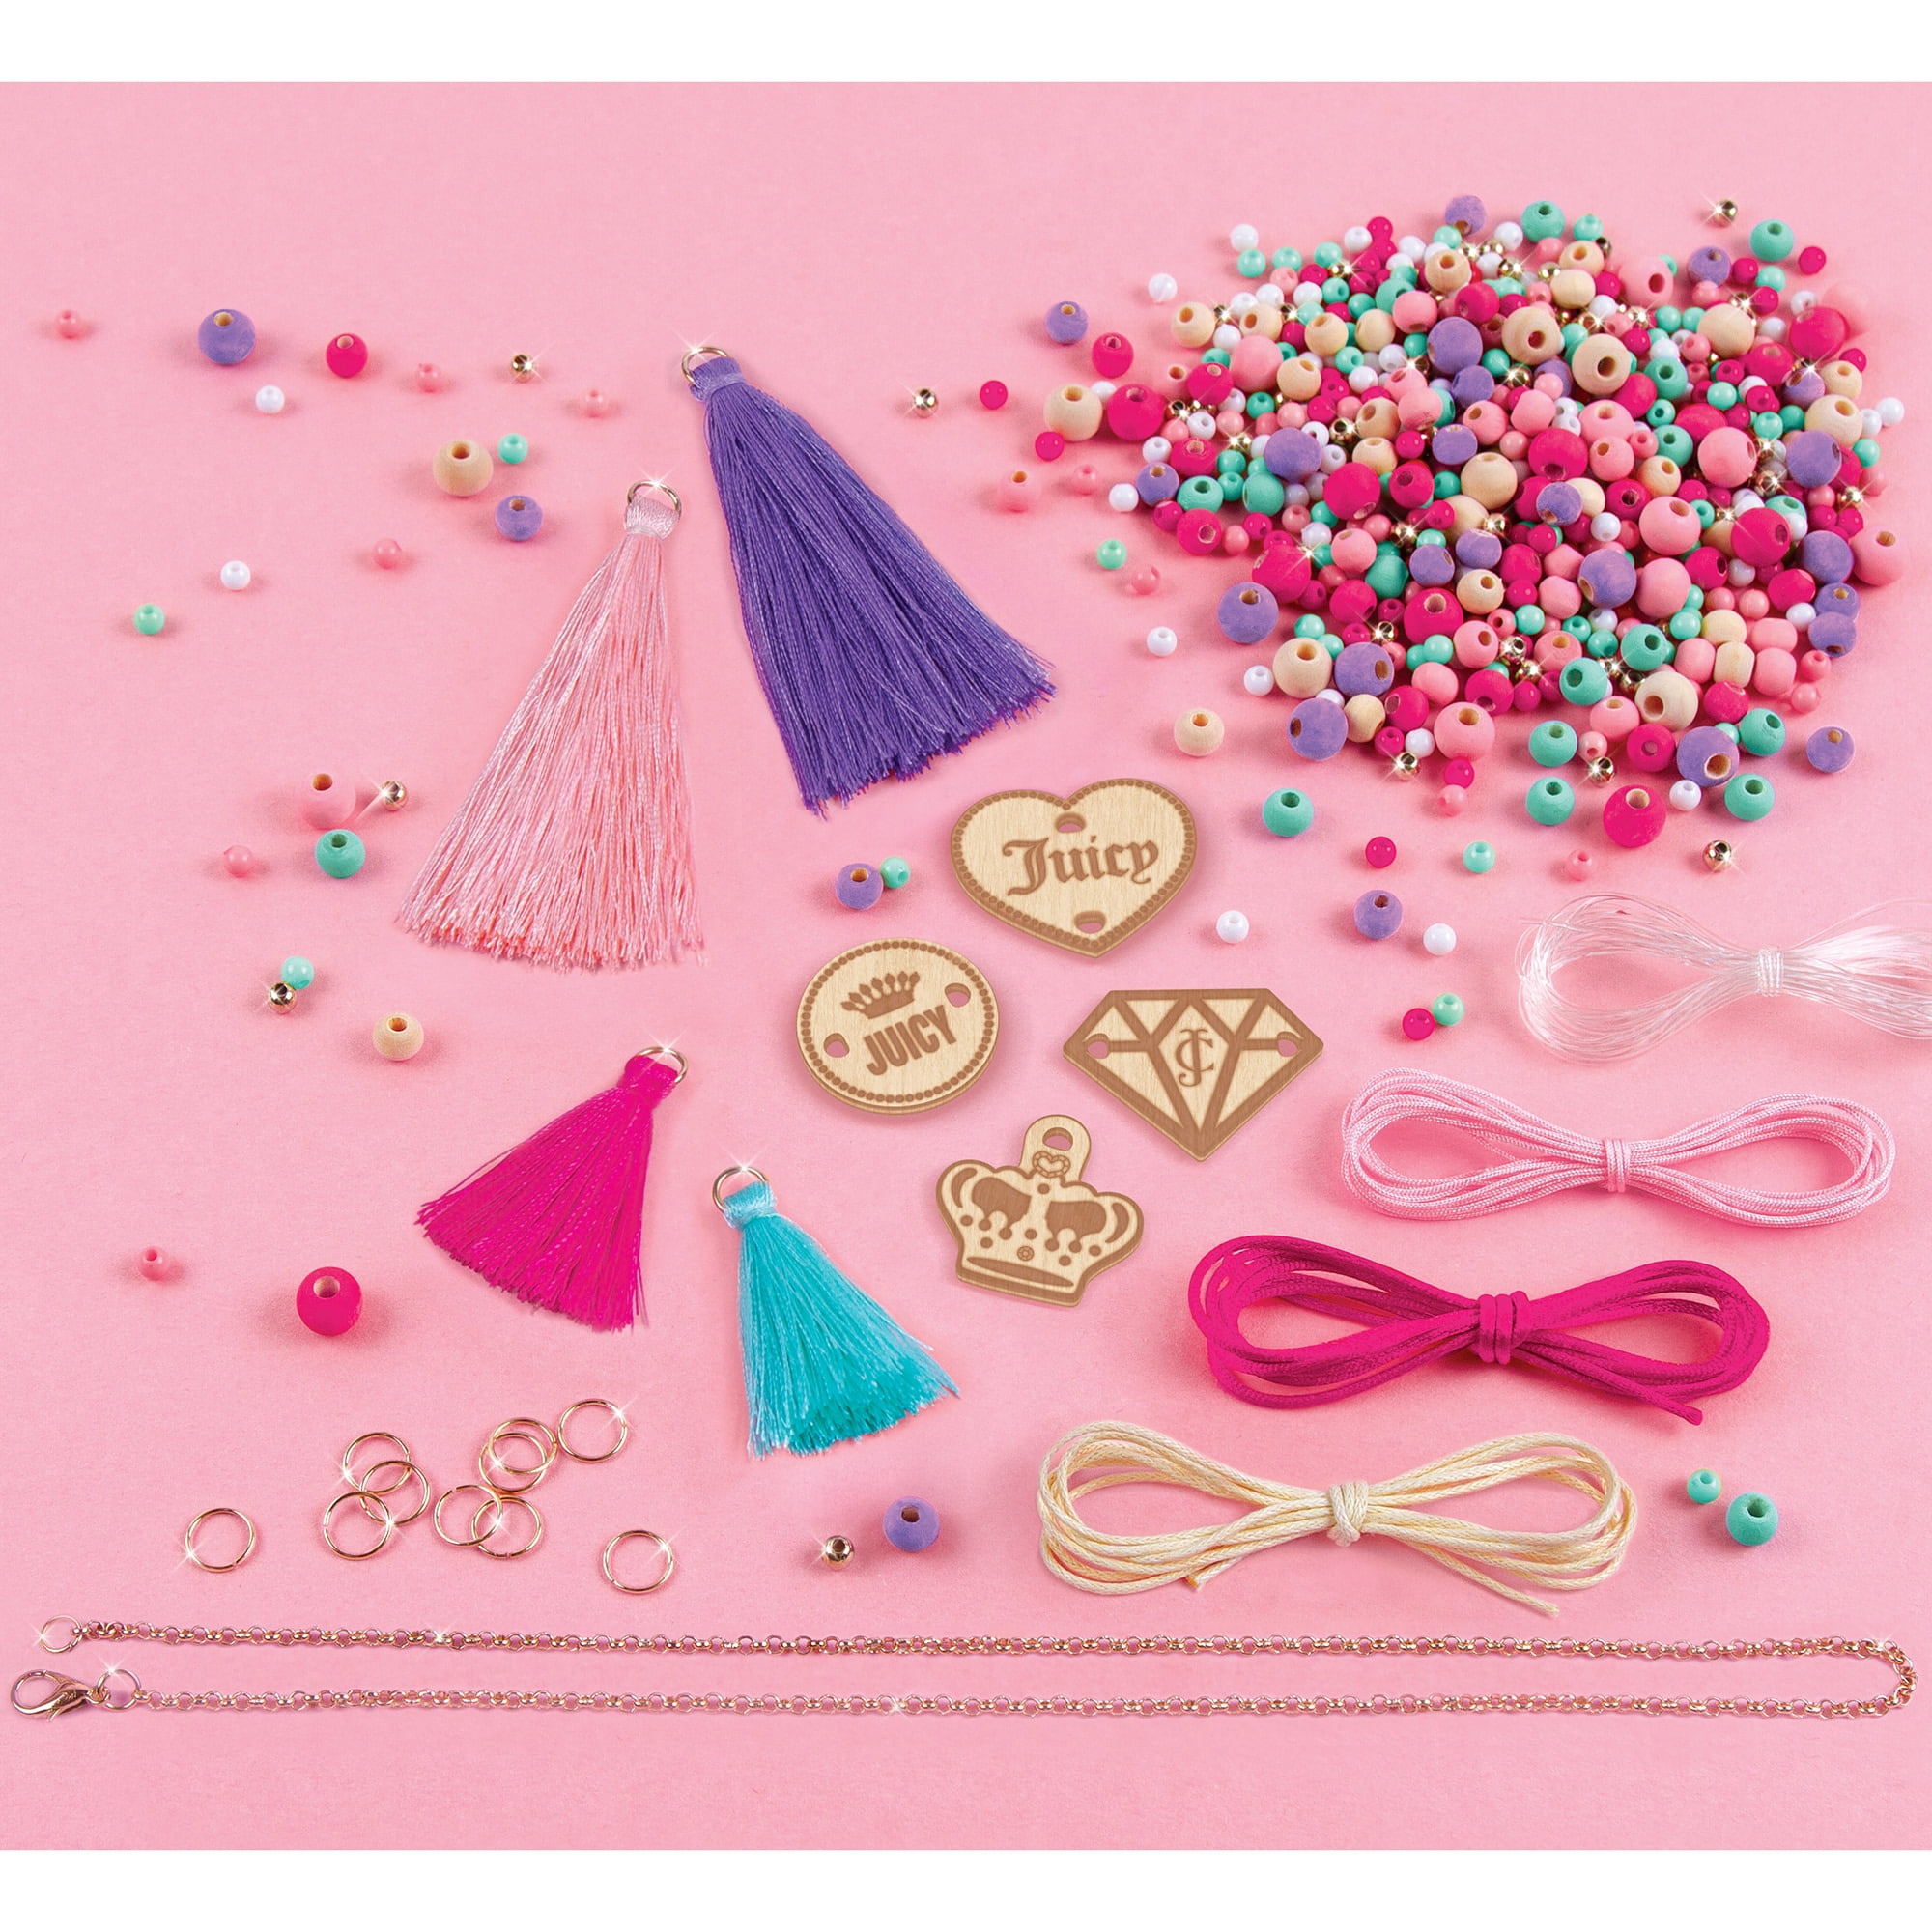 Juicy Couture Trendy Tassels DIY Jewelry Kit- Create 15 Pieces of Tassel  Jewelry, 664 Pieces, I4 Wooden Juicy Charms, Ages 8+ 